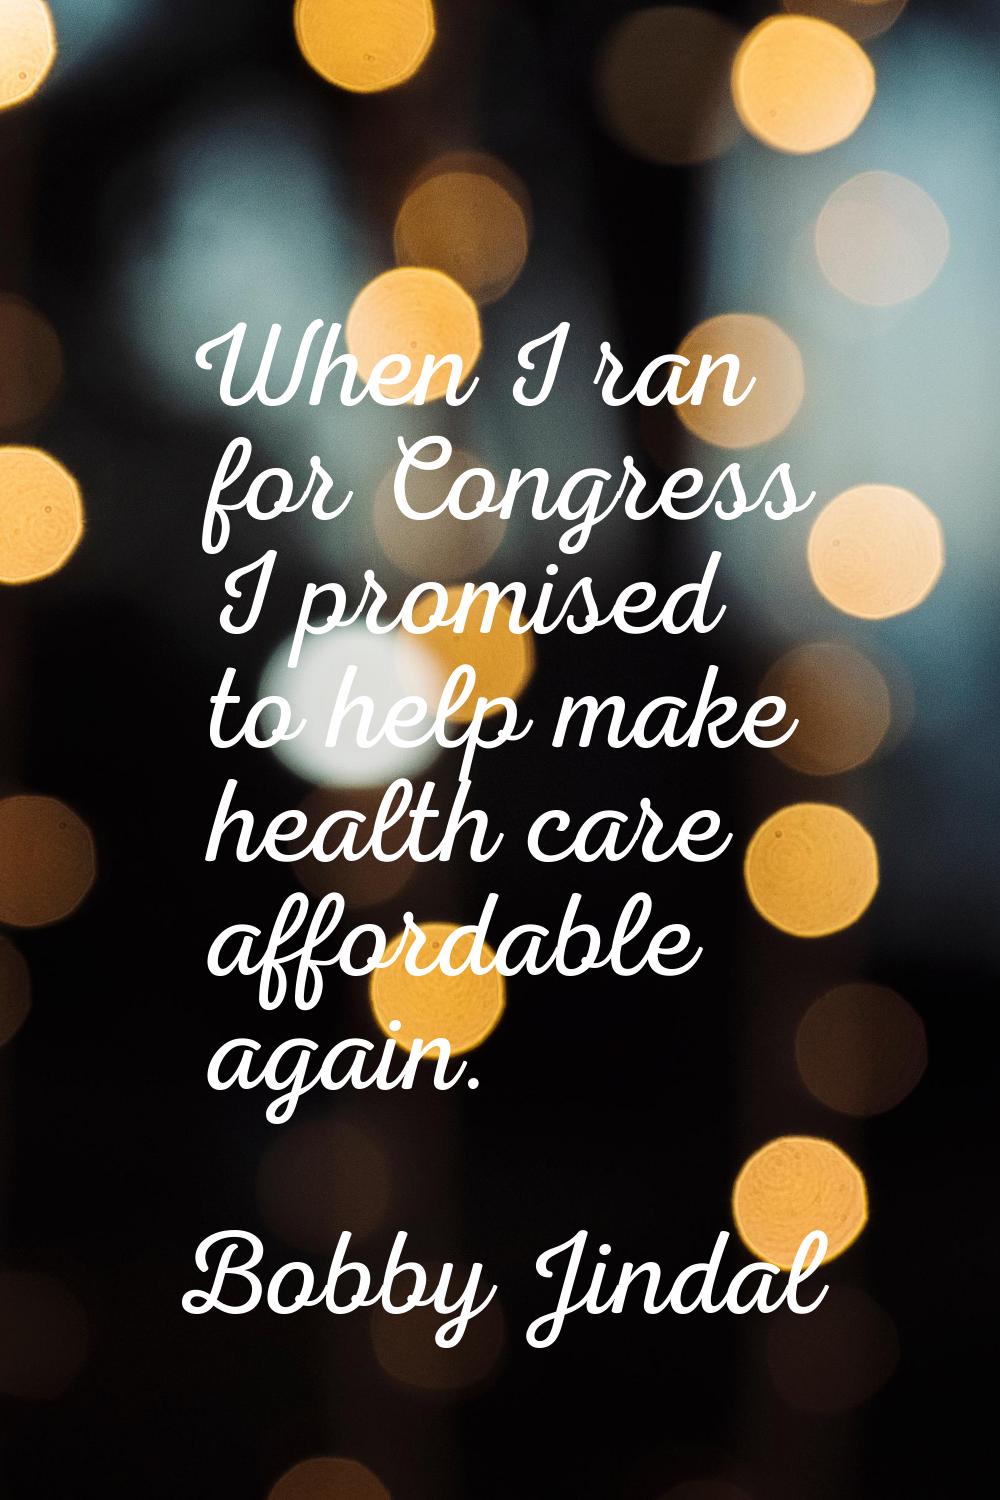 When I ran for Congress I promised to help make health care affordable again.